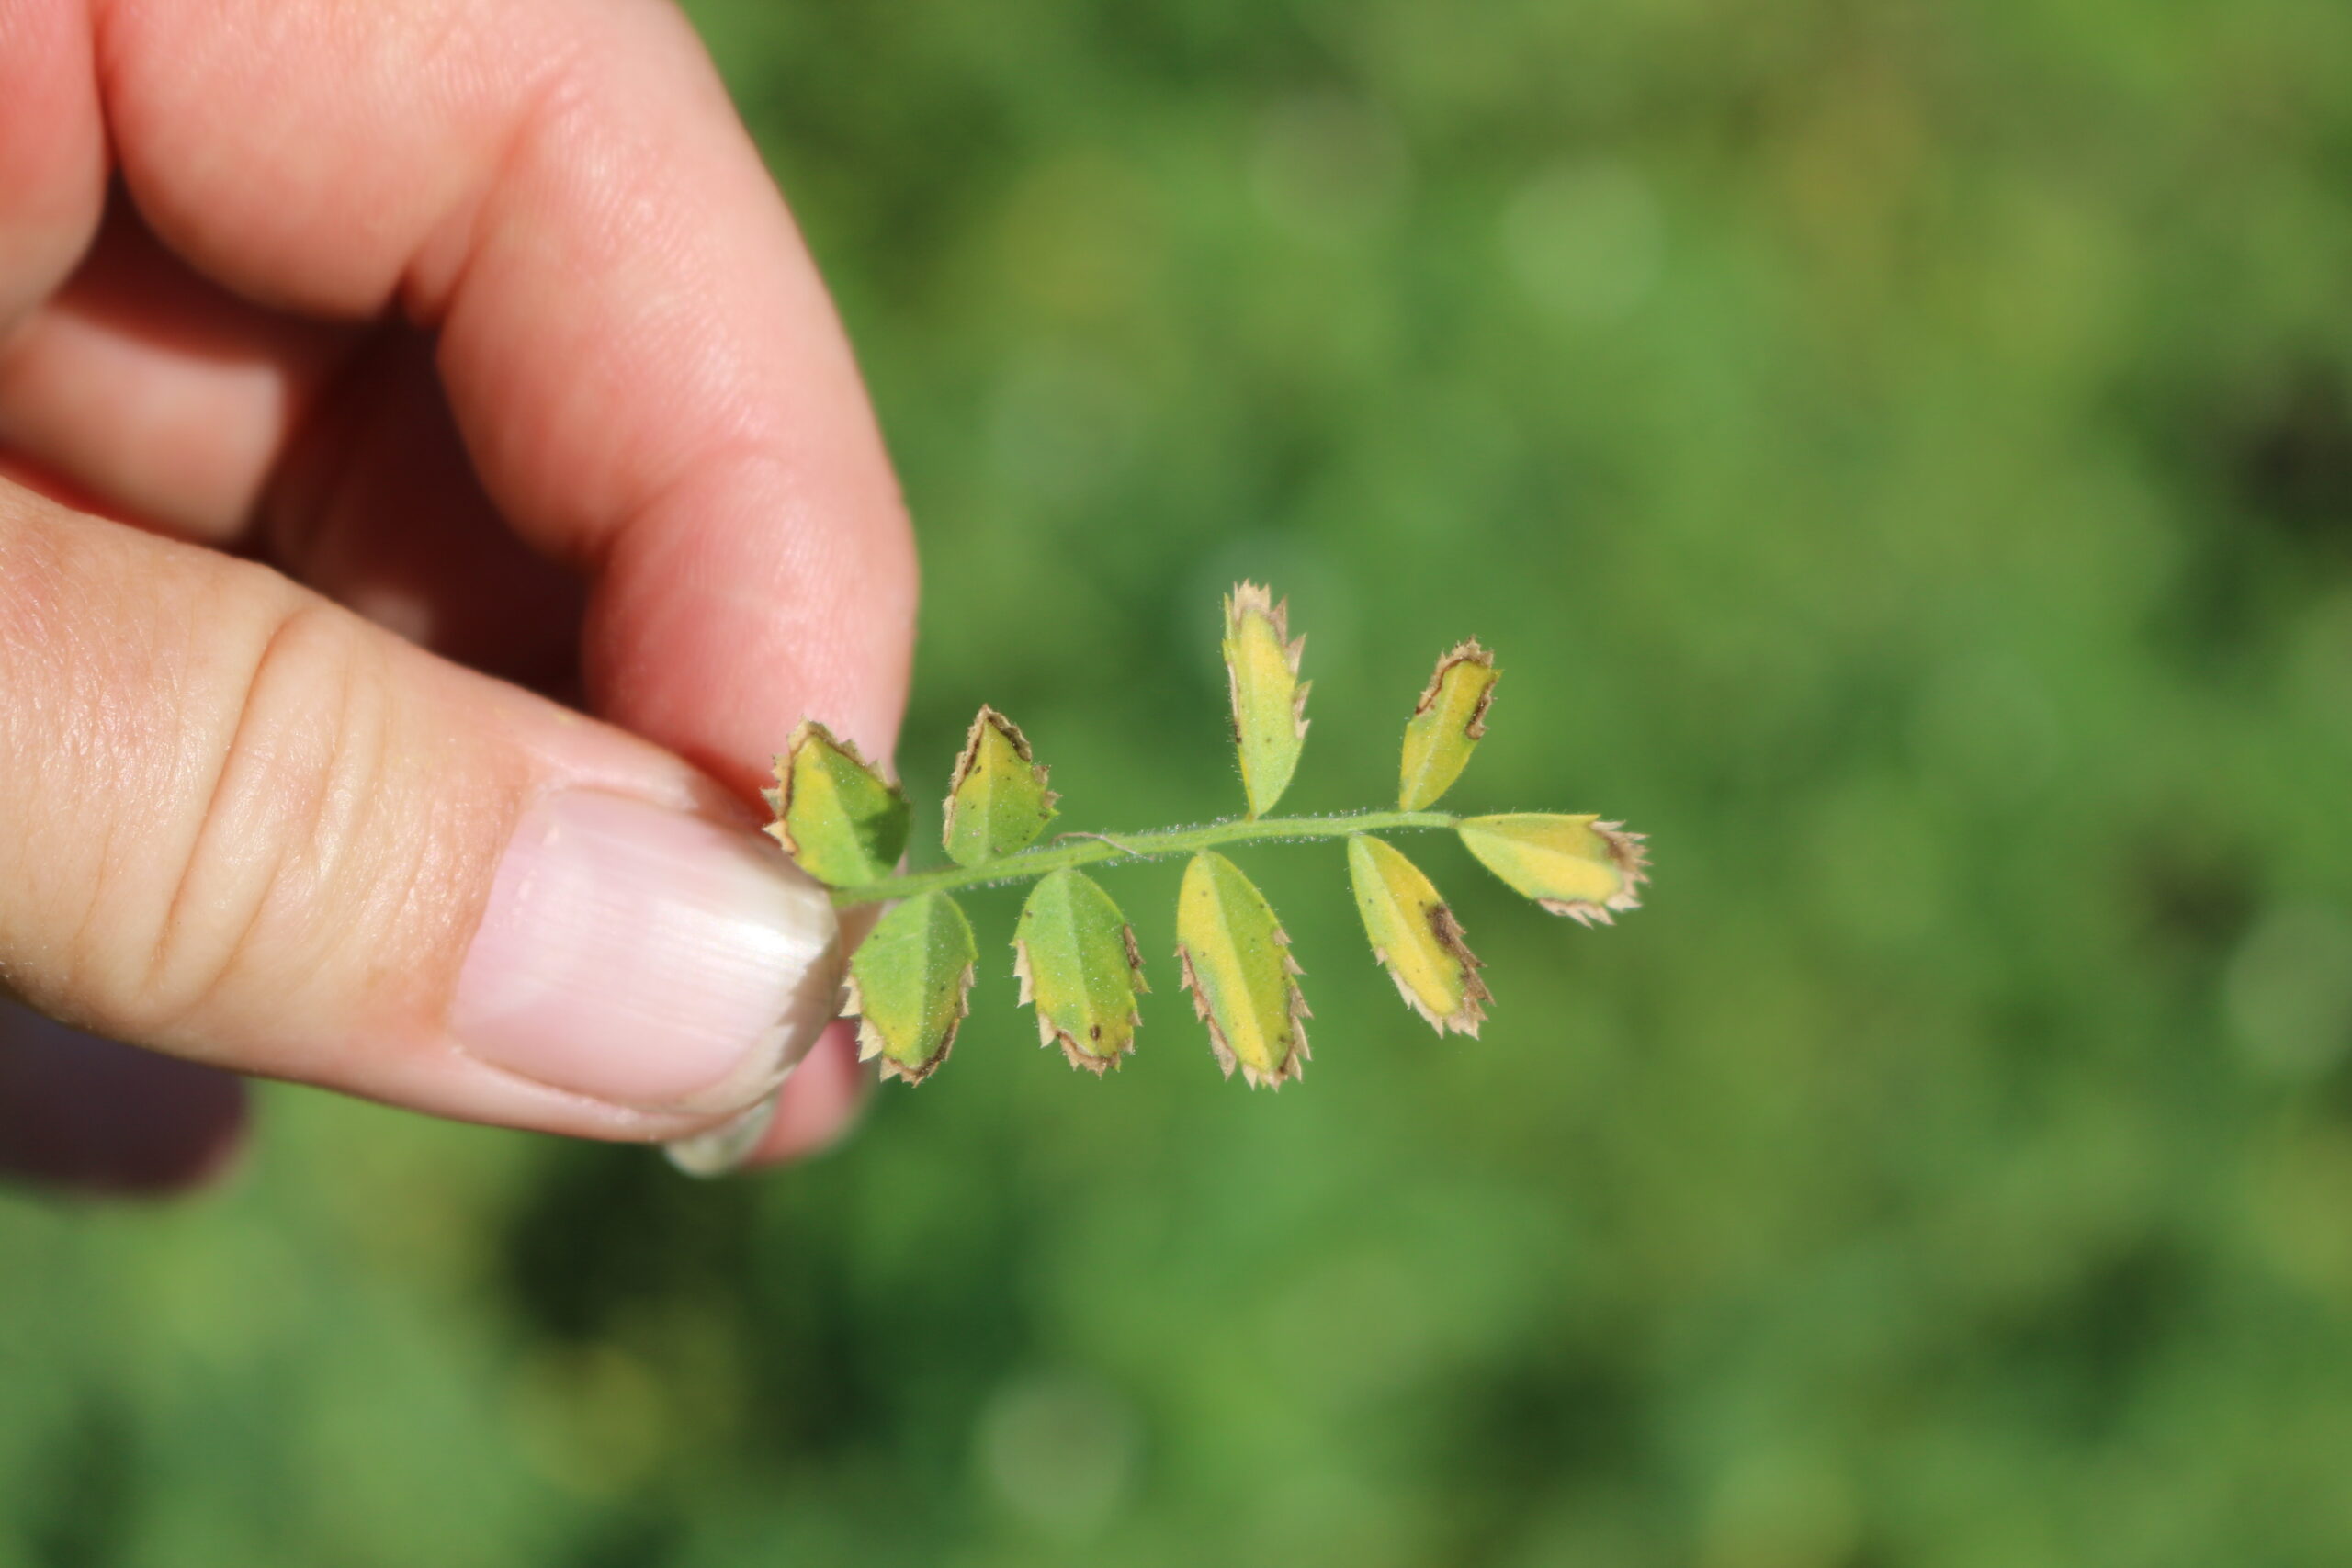 Ascochyta on Chickpea Leaves